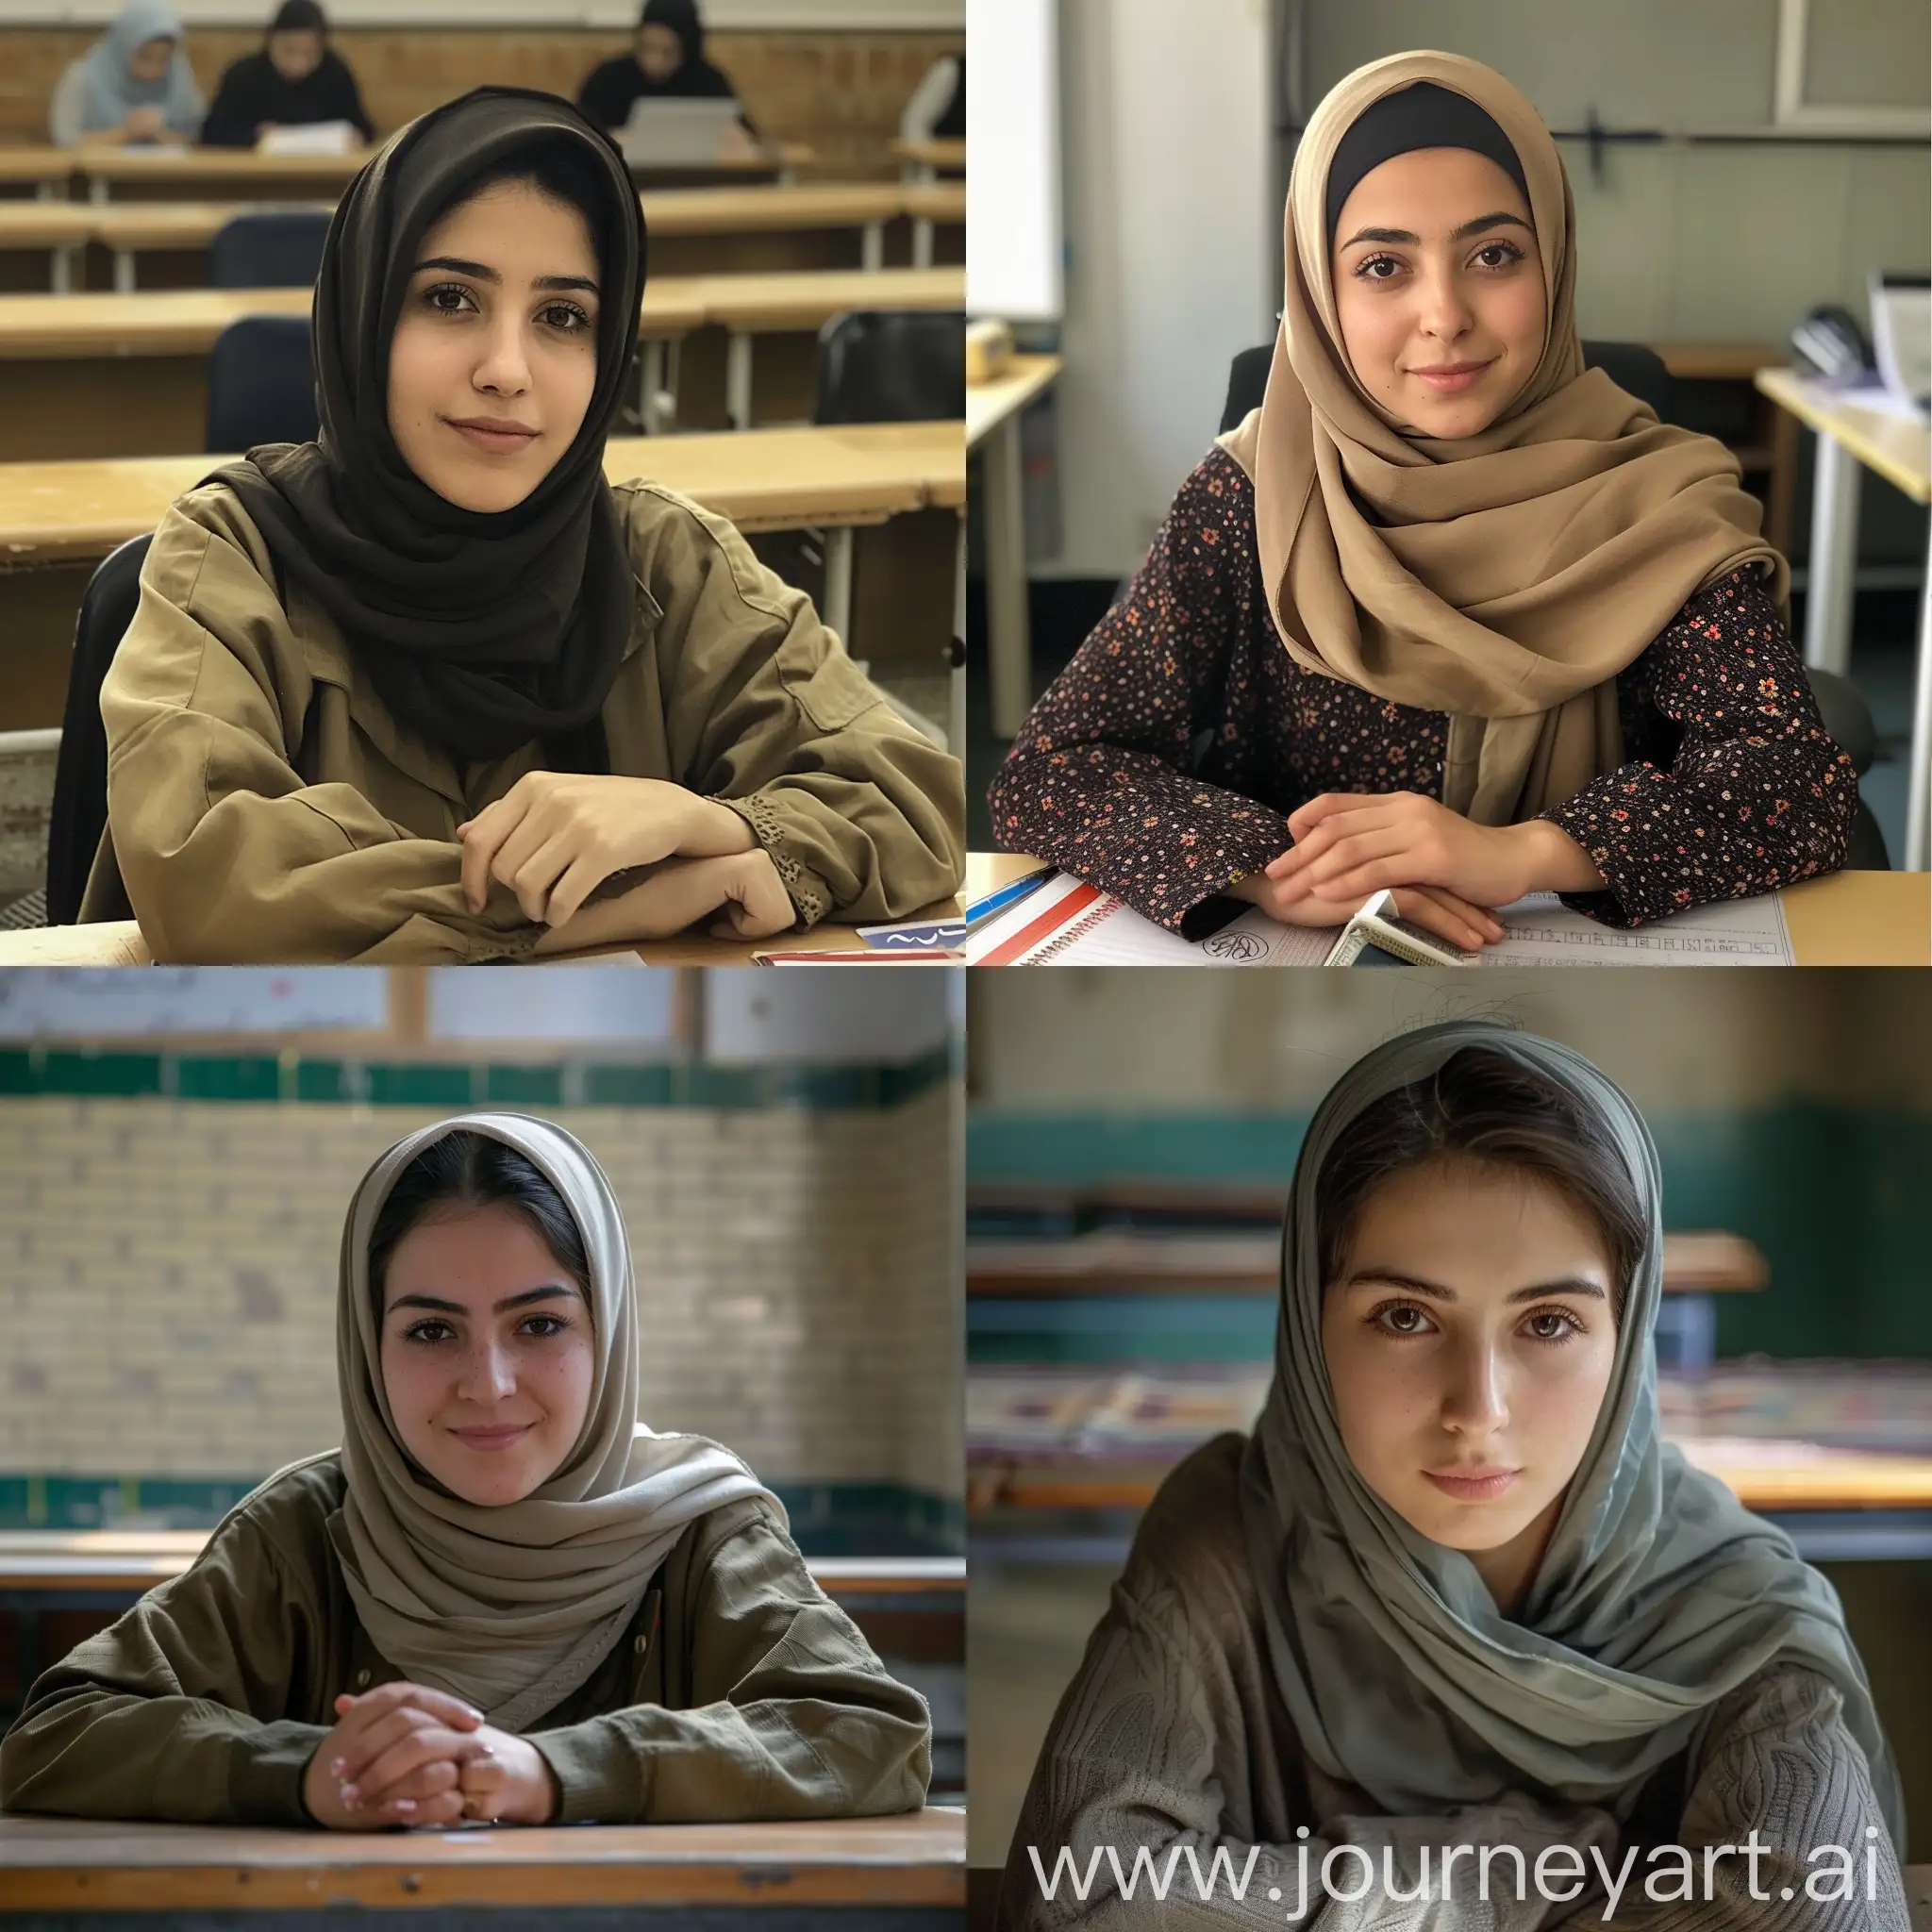 An Iranian girl with a hijab, about 25 years old, is sitting behind the desk and is a teacher